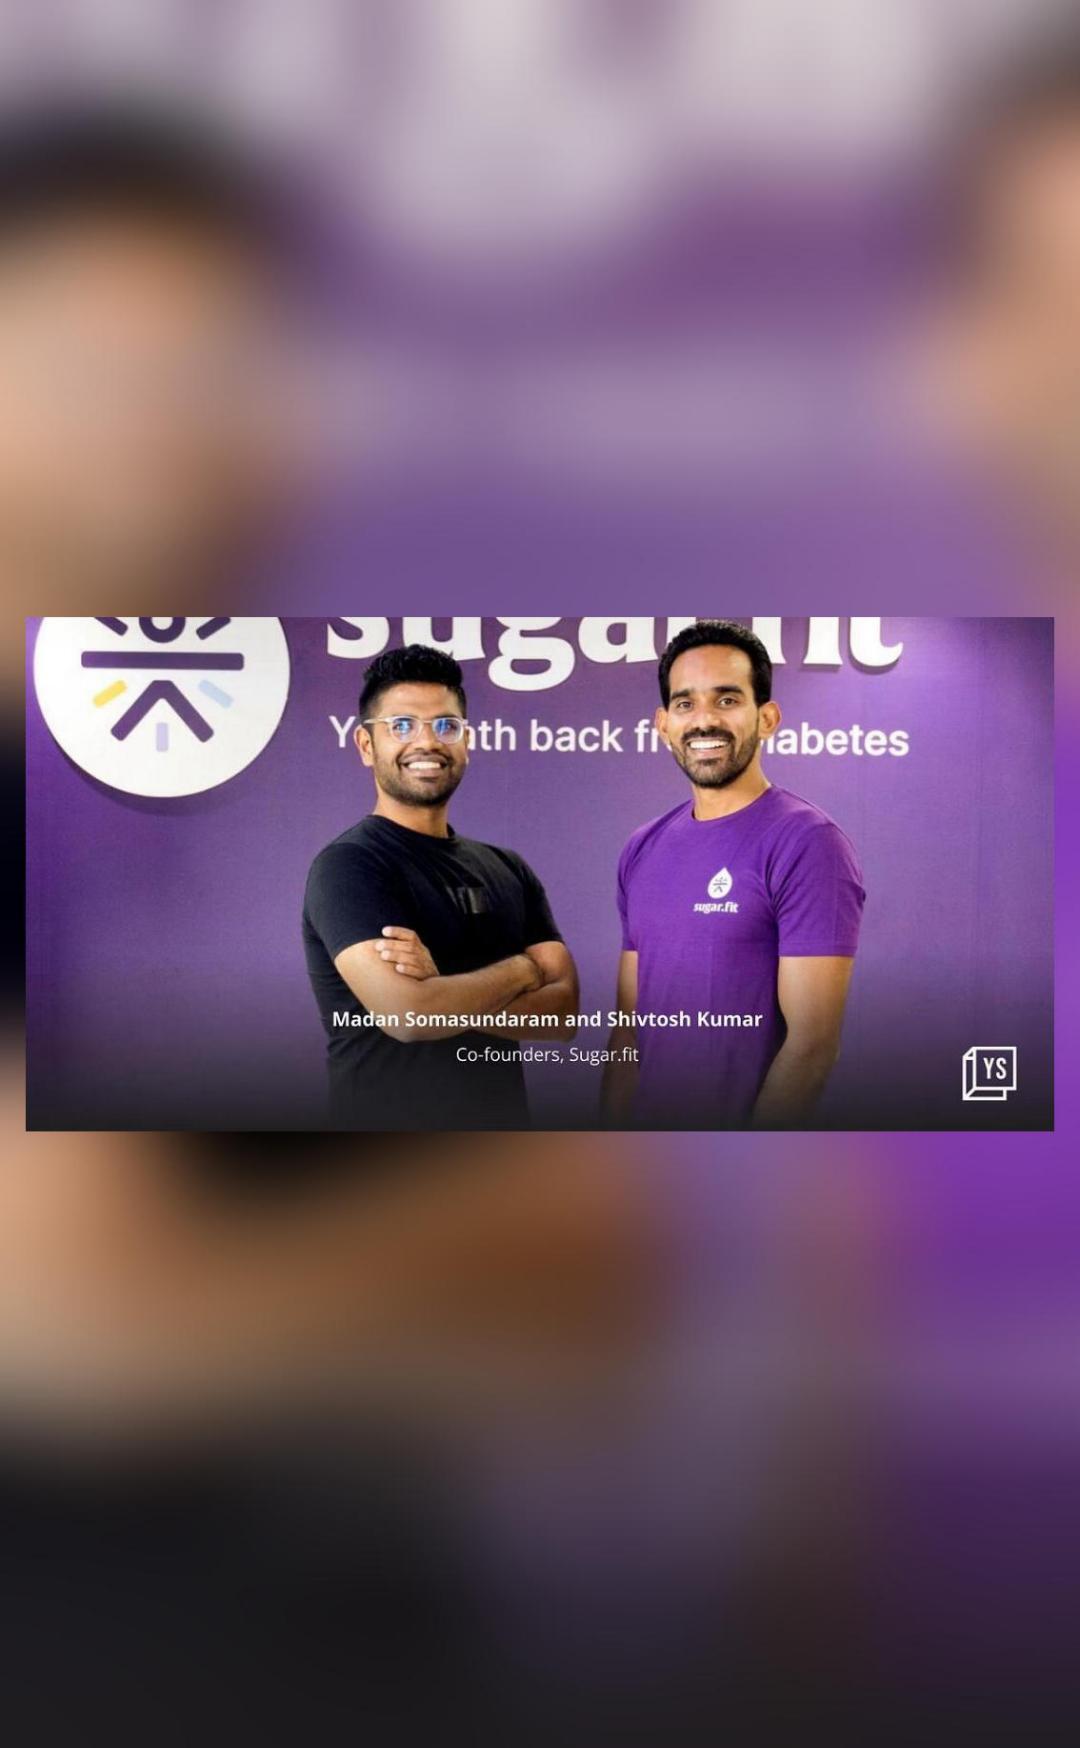 Sugar.fit secures additional $5M in Series A